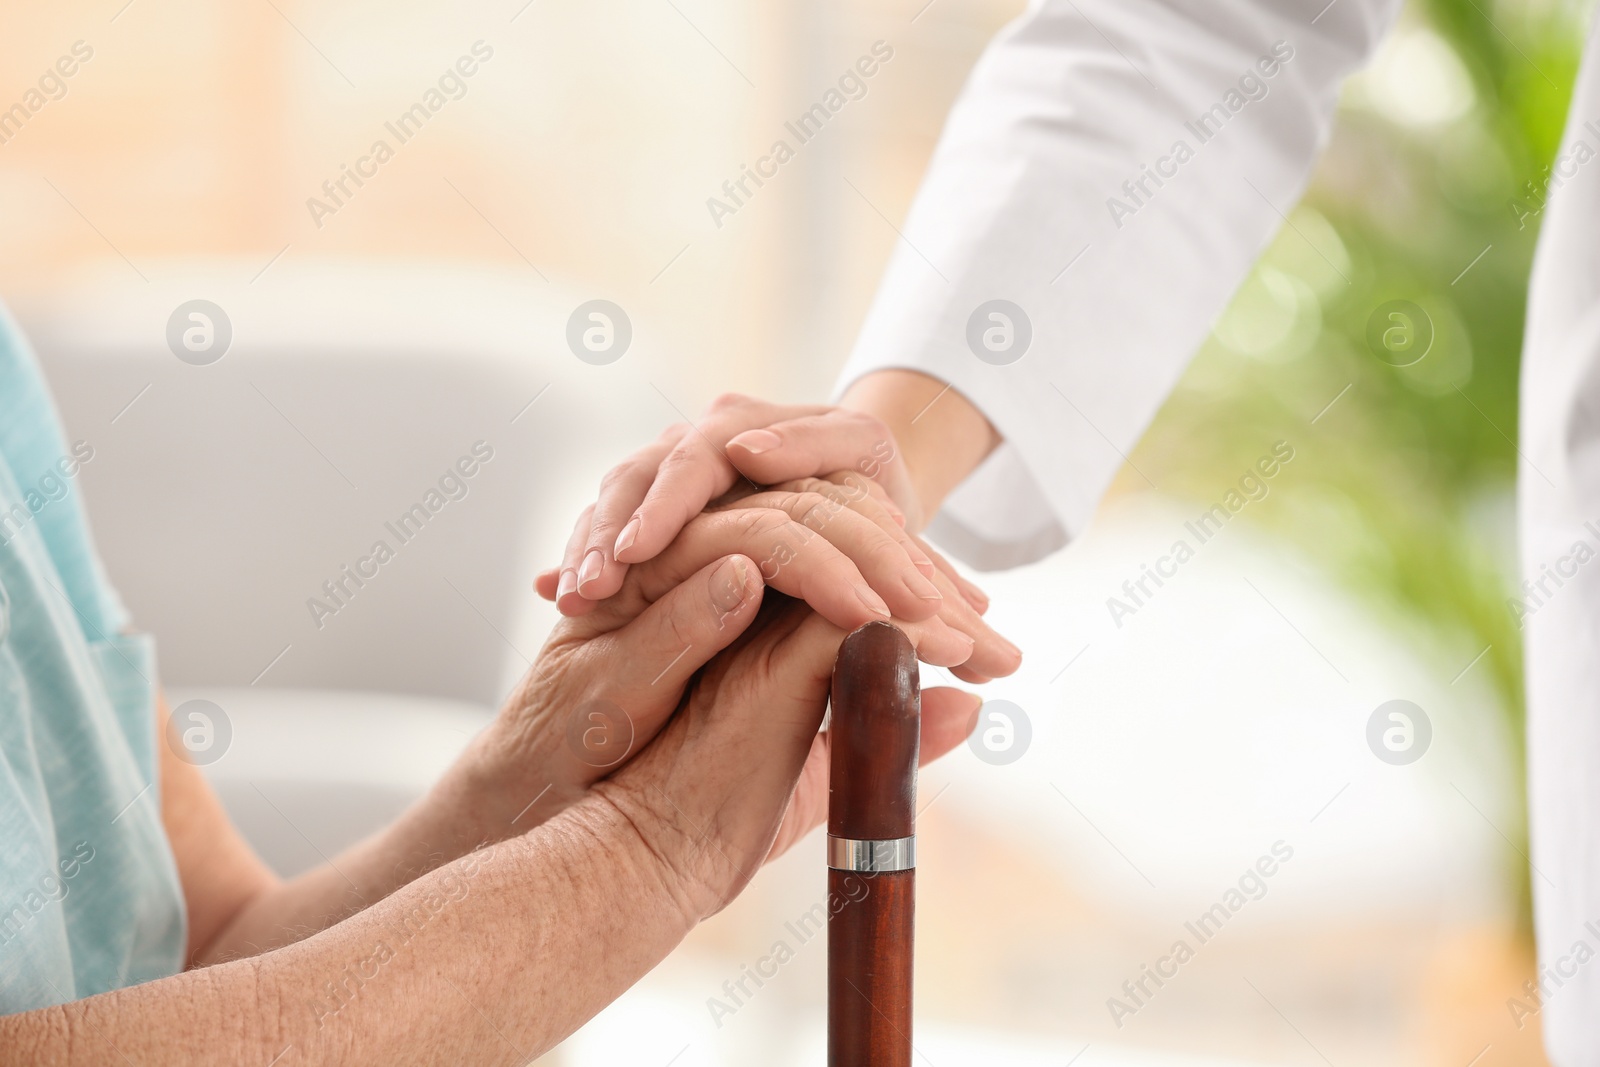 Photo of Nurse comforting elderly woman with cane against blurred background, closeup. Assisting senior generation